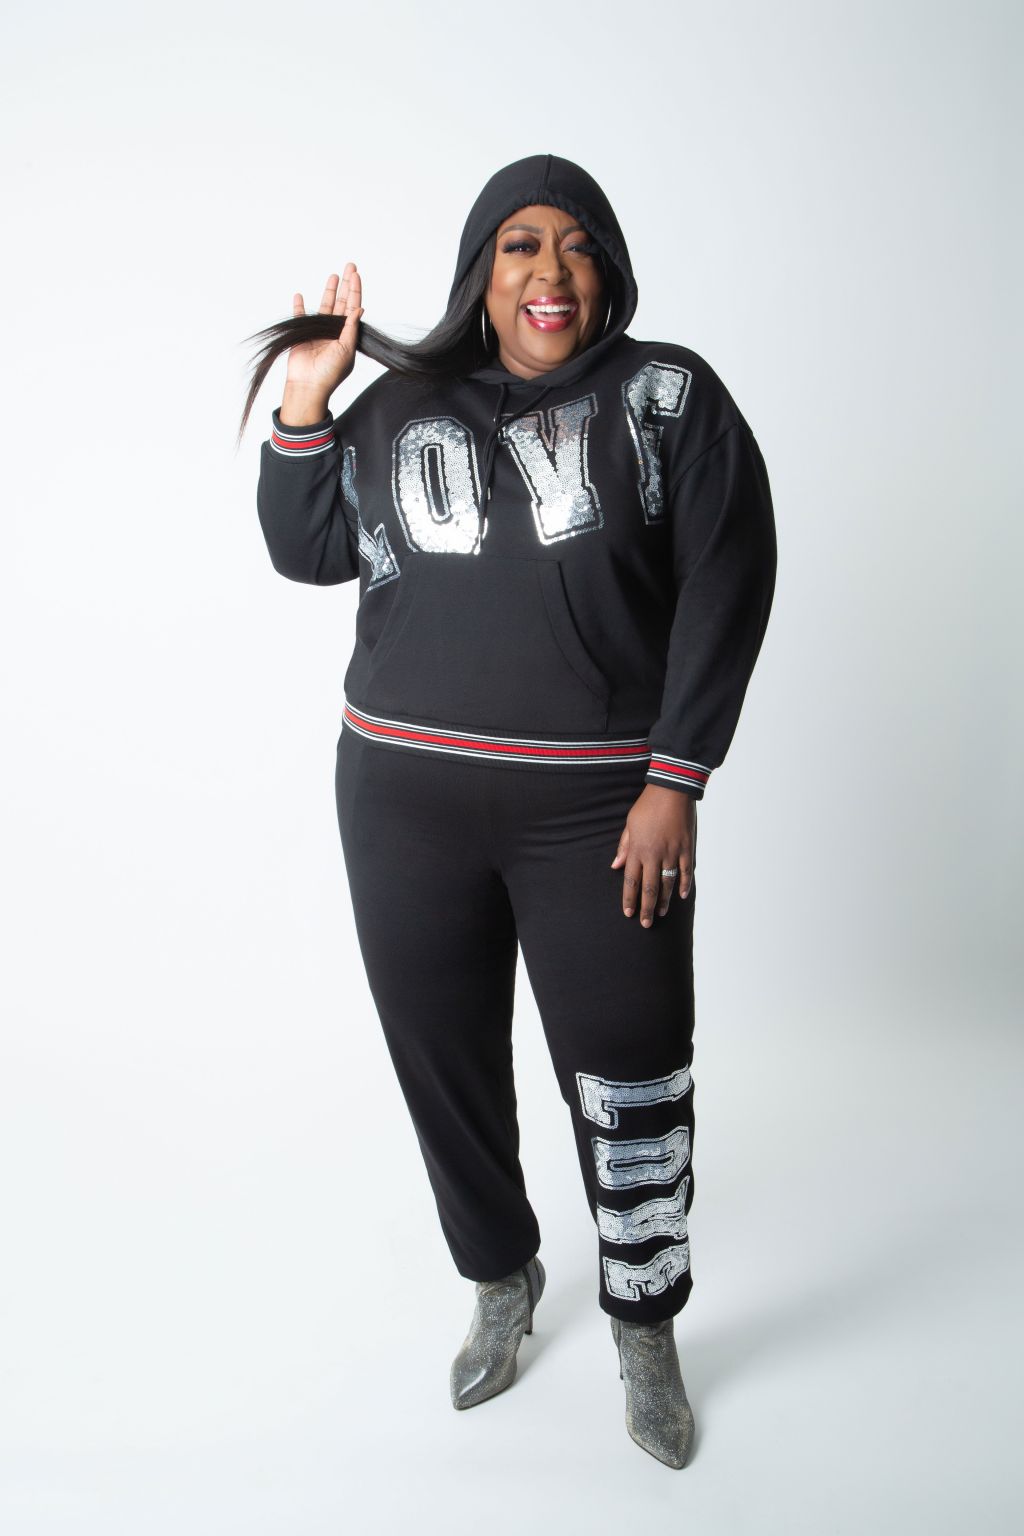 Ashley Stewart x Loni Love Holiday Collection